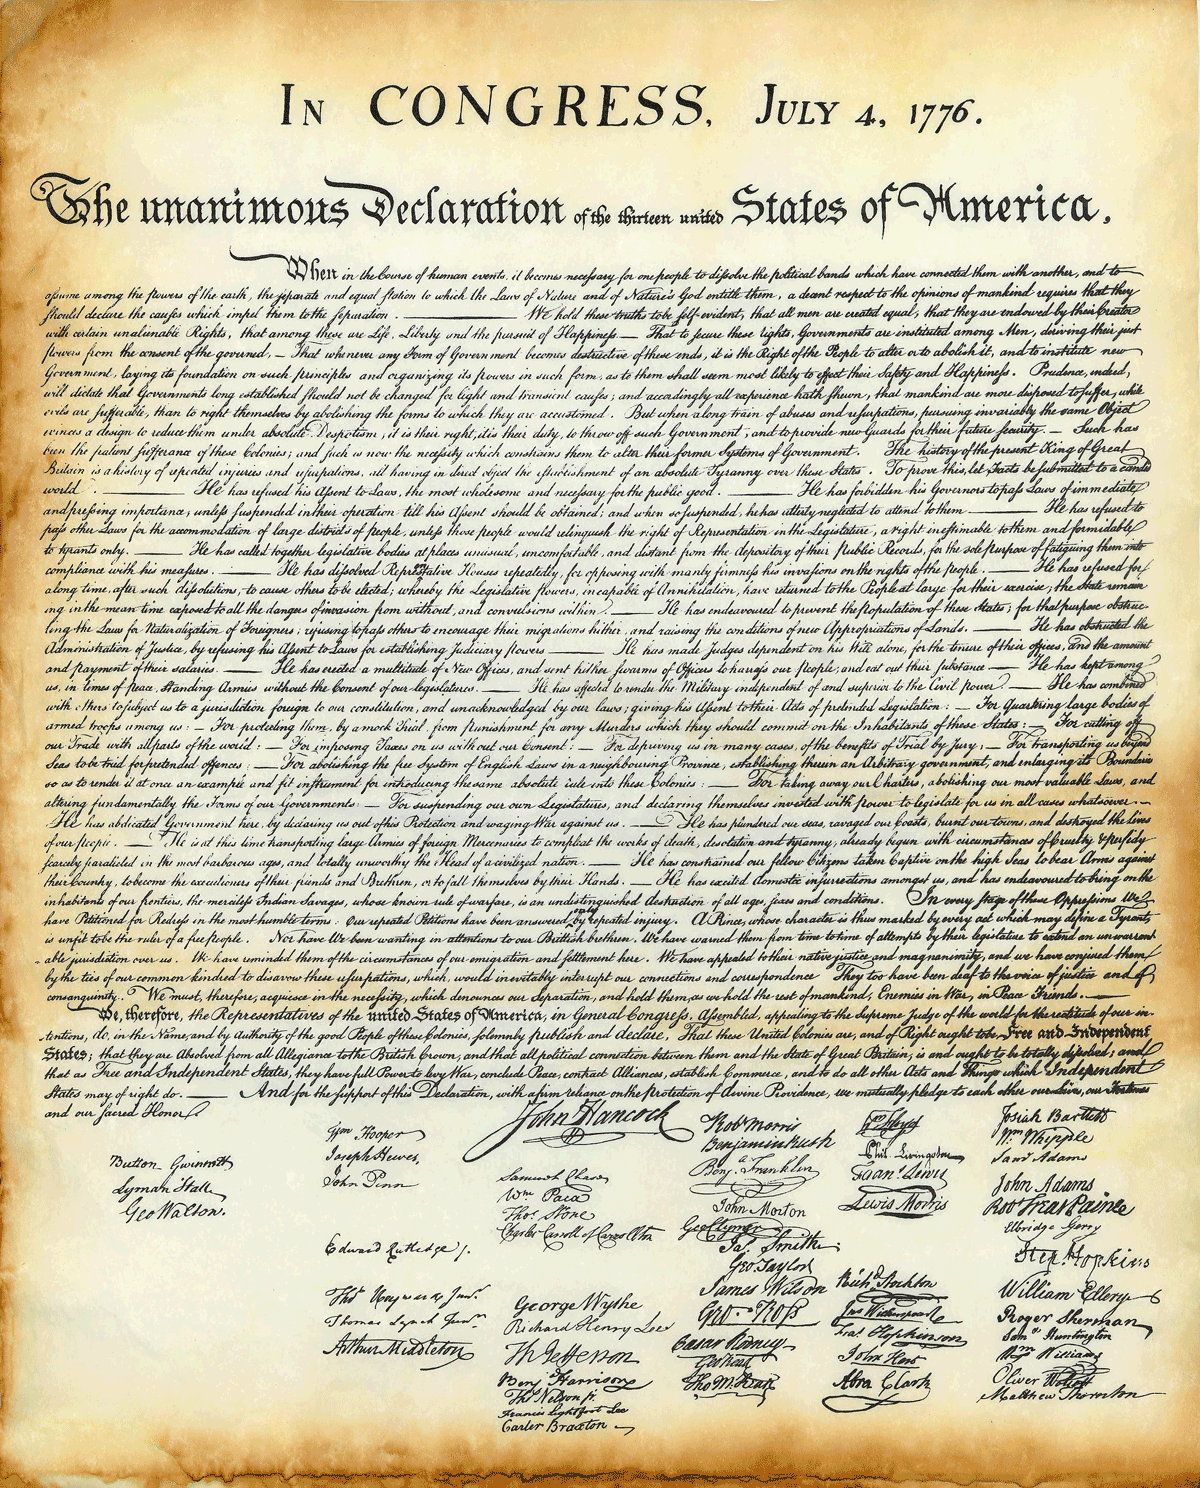 The Declaration of Independence!